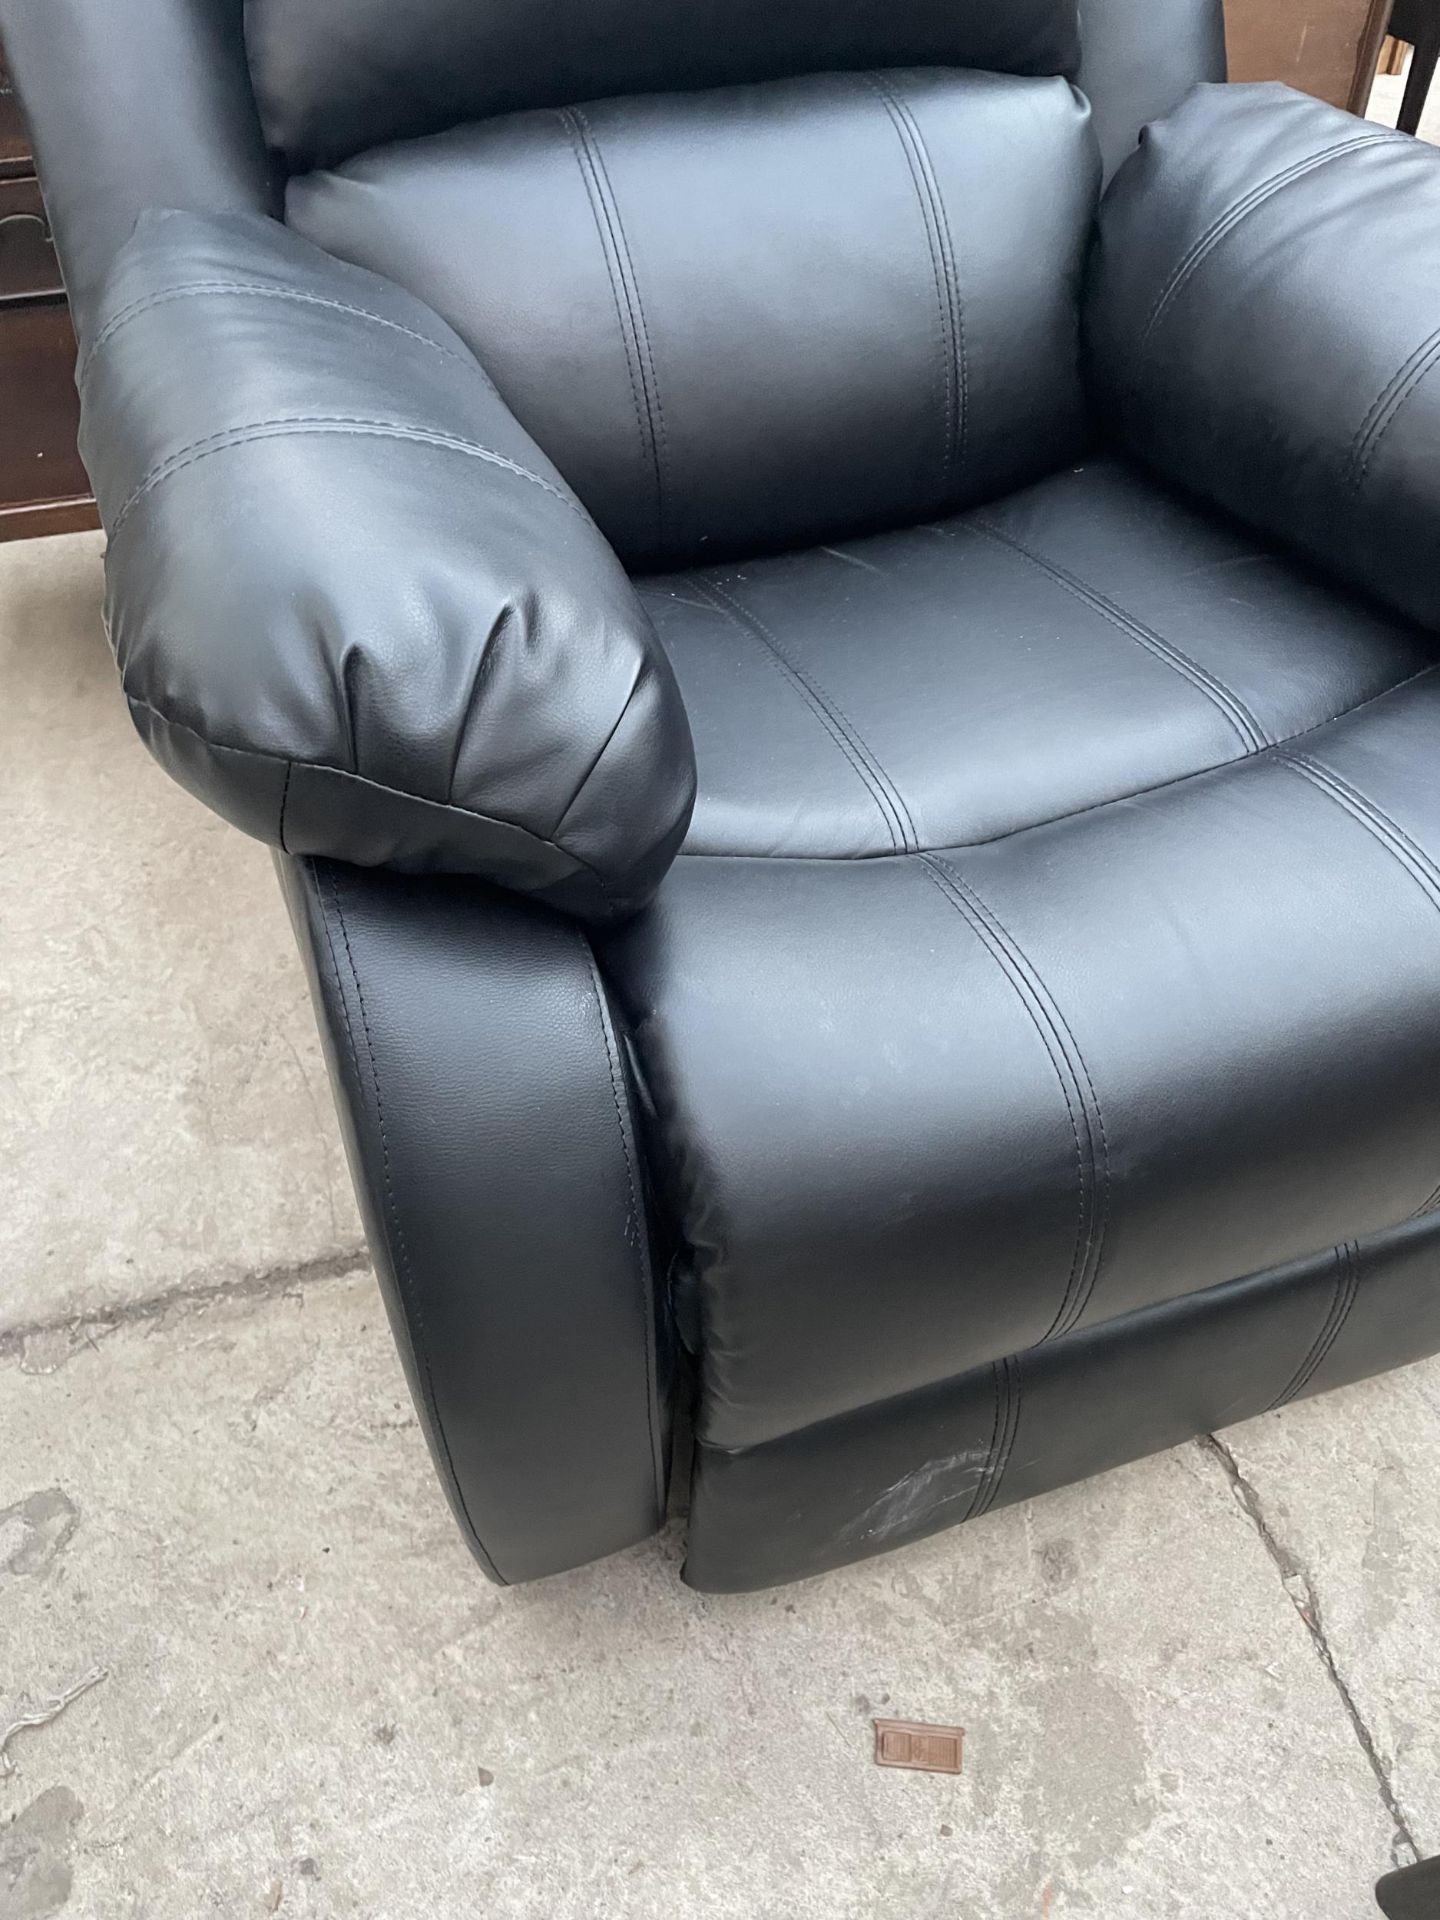 A MODERN DUNELM BLACK FAUX LEATHER RECLINER CHAIR - Image 3 of 3